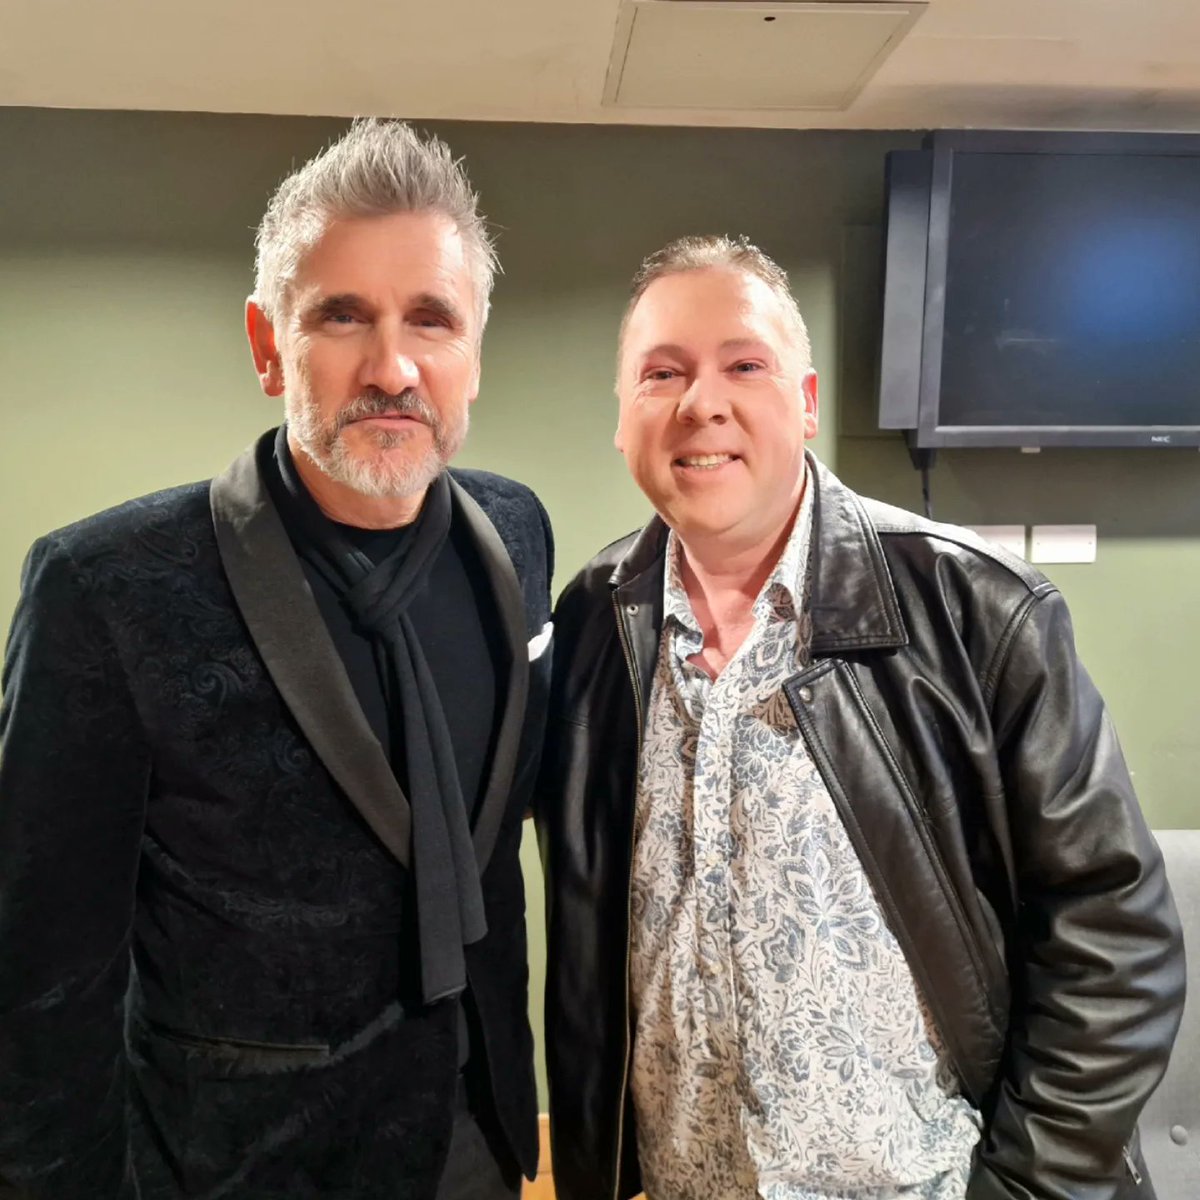 Hanging out with @curtisstigers at the Ulster Hall. What an amazing show tonight from a superb musician who can do everything from pop to jazz to blues. Watch out for my interview with Curtis coming soon to @northernvisions #curtisstigers